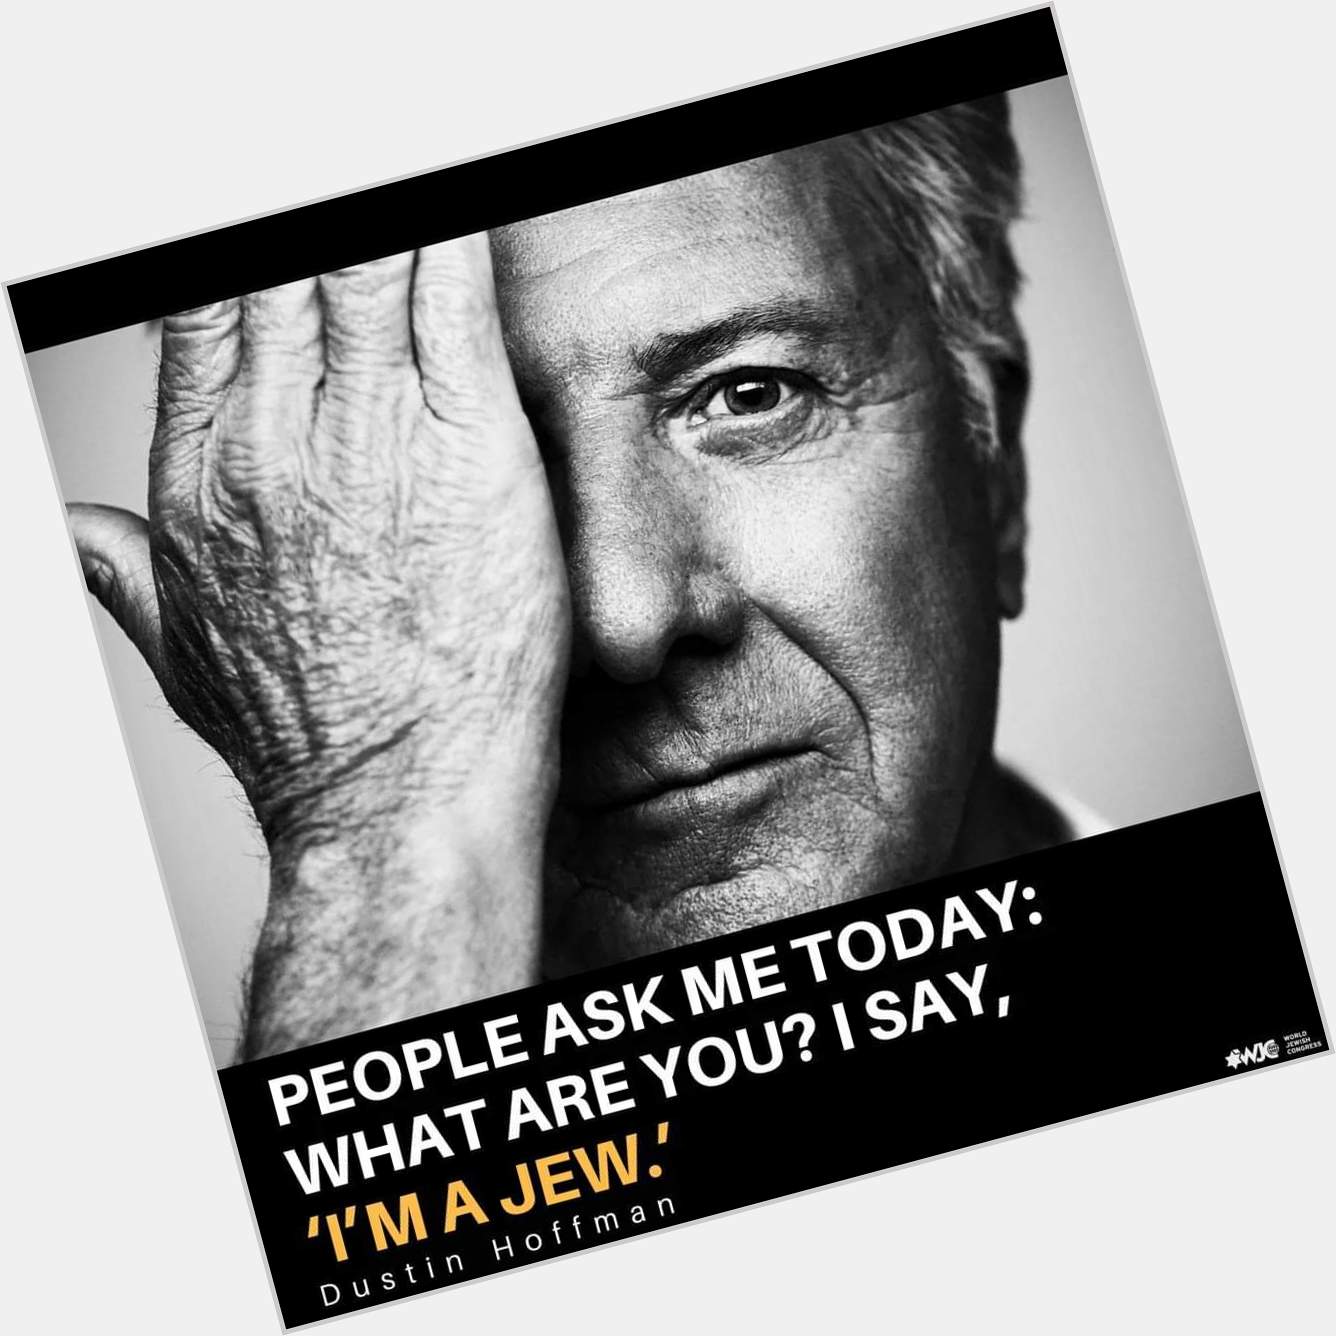 Happy birthday to Jewish actor Dustin Hoffman who turns 85 years old today. 